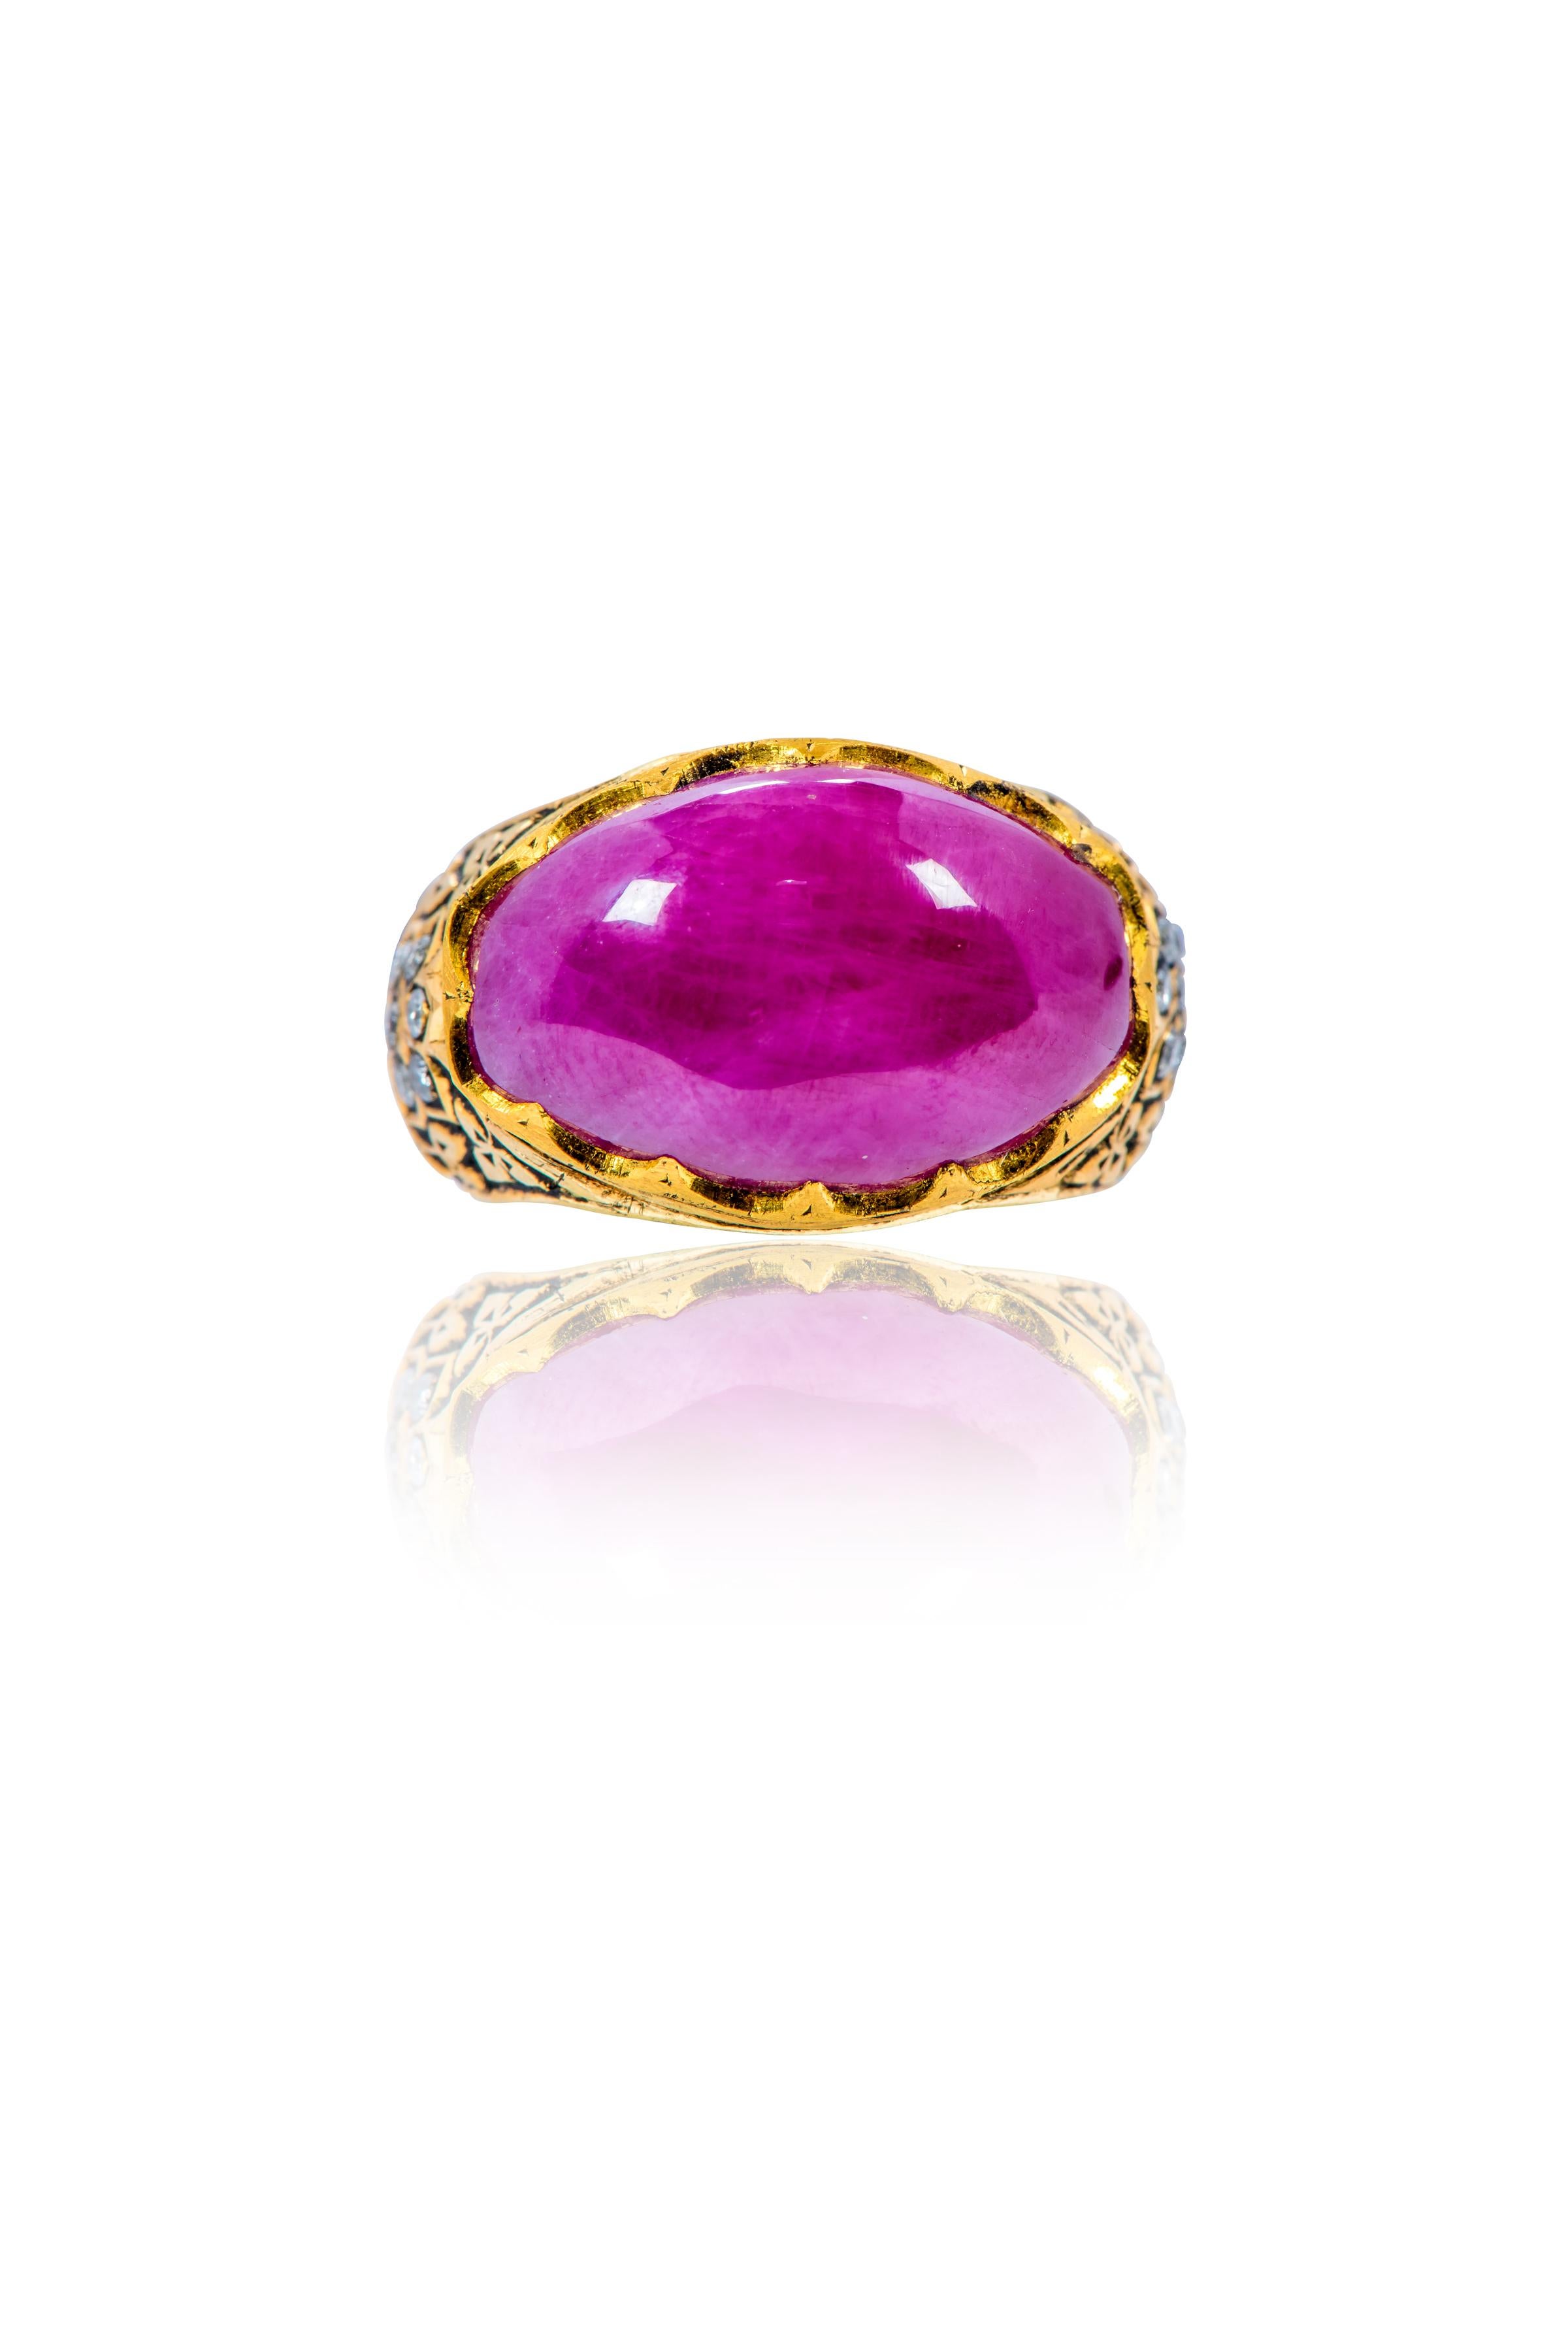 22 Karat Yellow Gold 14.85 Carat Cabochon Ruby and Diamond Ring For Sale 1